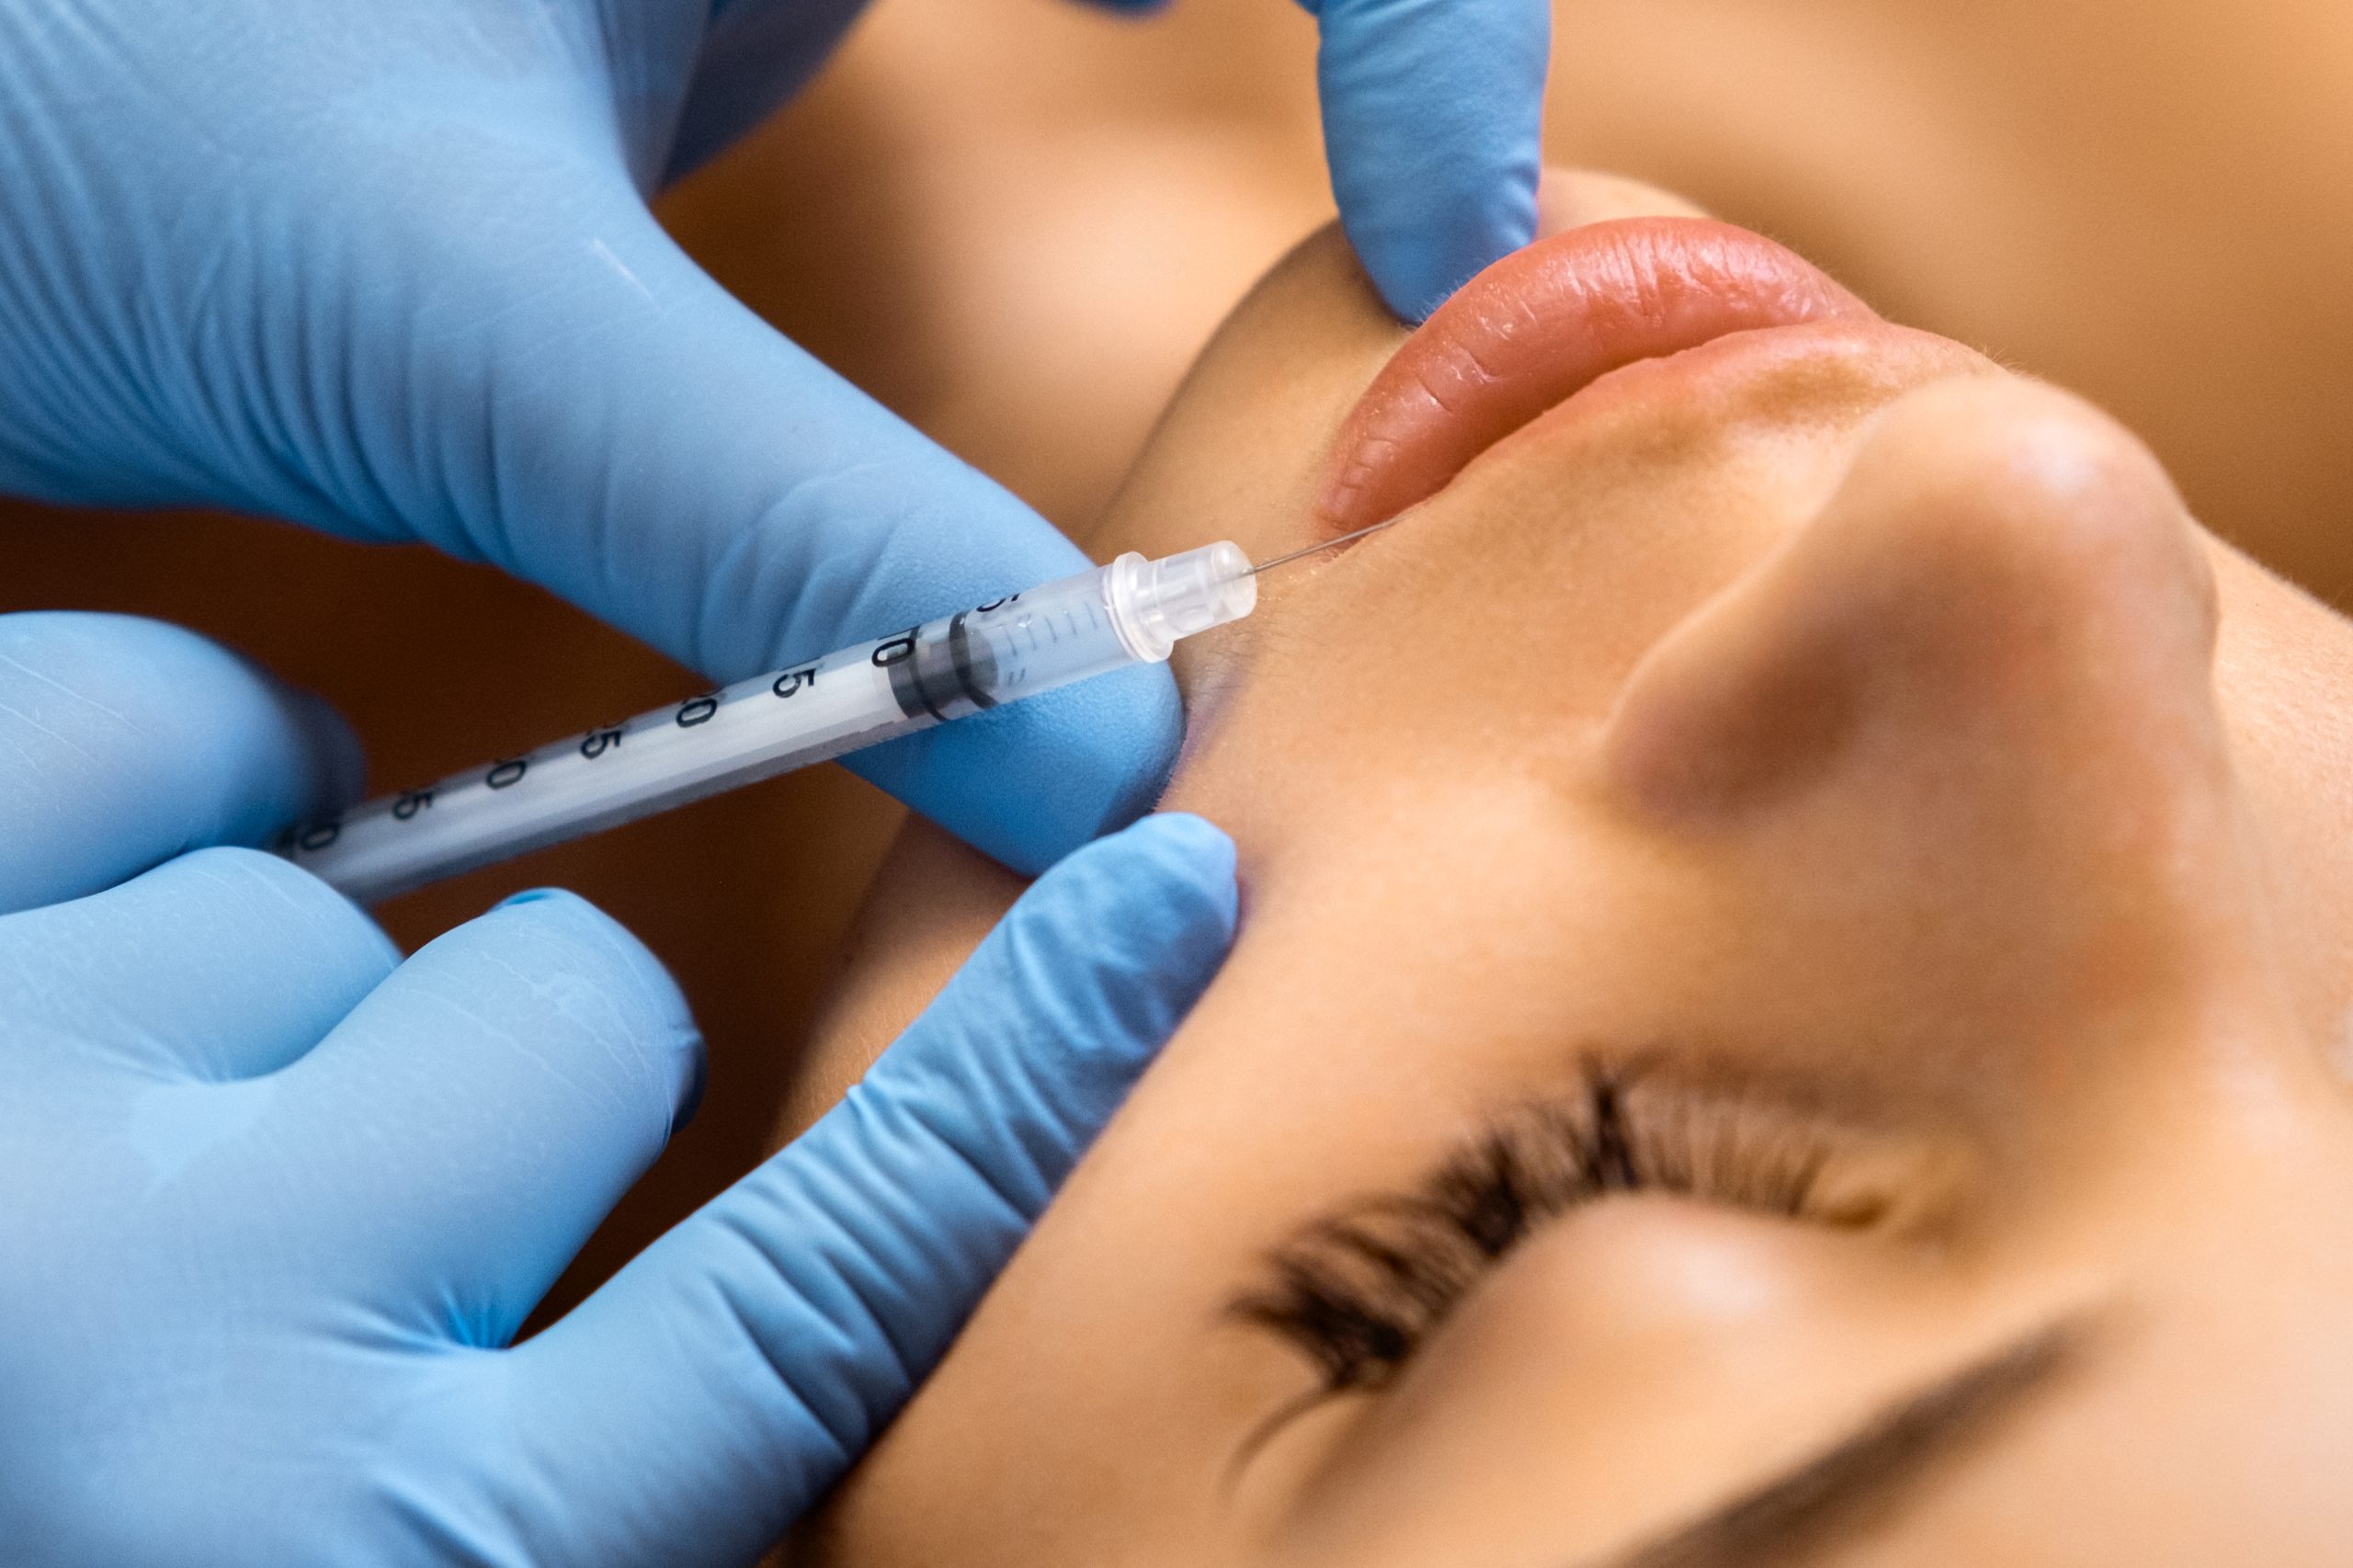 Lip augmentation procedure with hyaluronic acid in a beauty salon